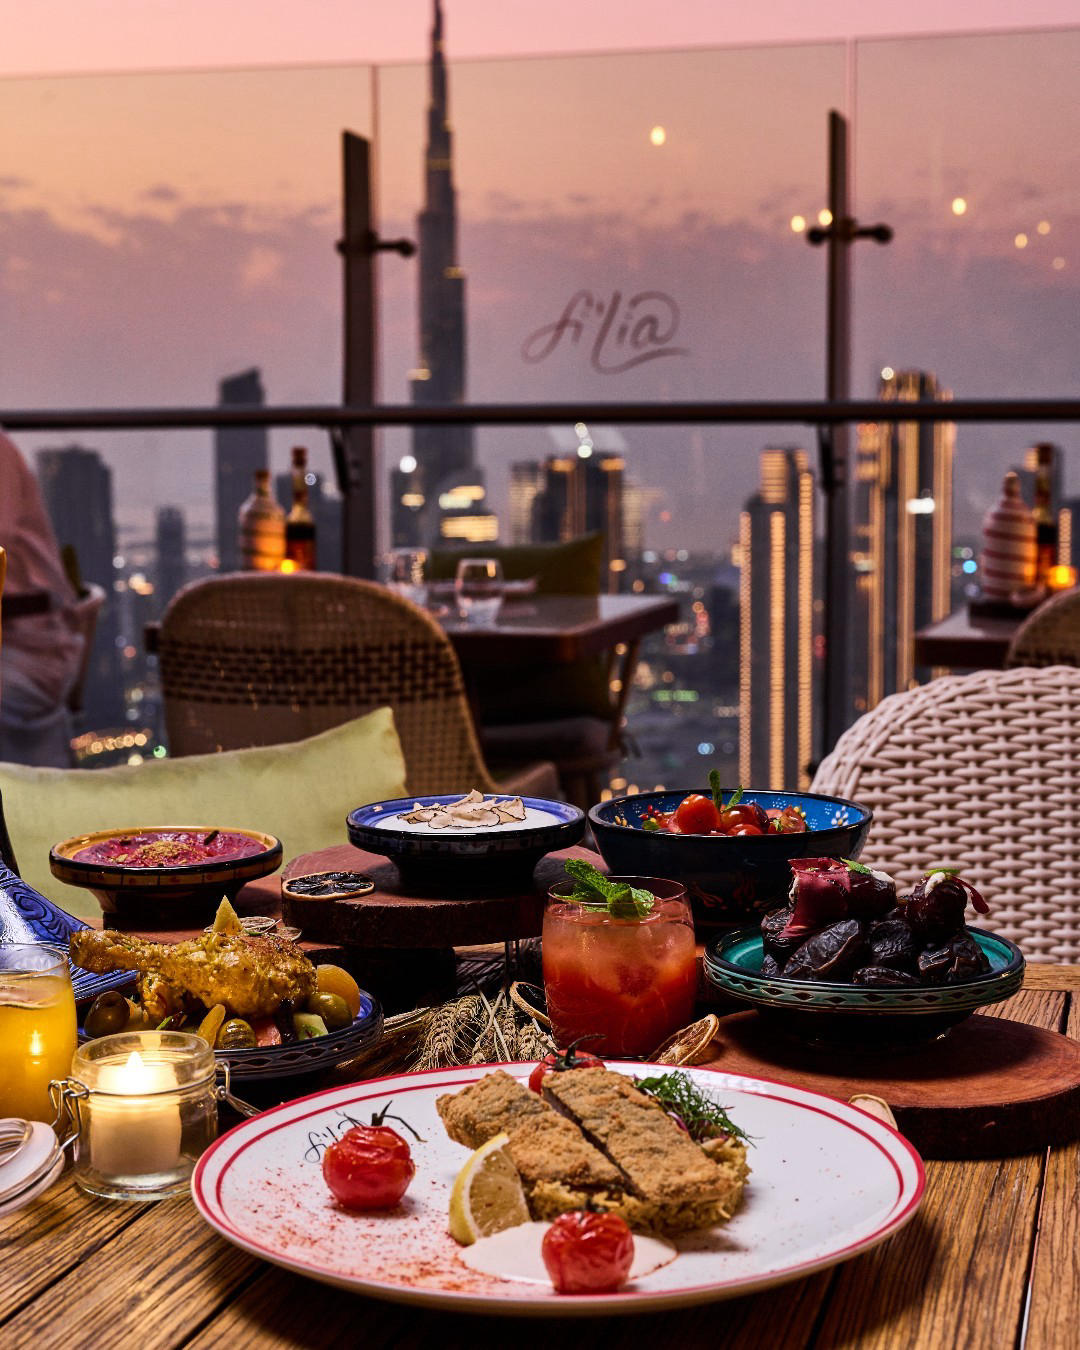 Blending the richness of Ramadan dishes with Italian flavours at #filiadubai Indulge in a special cu